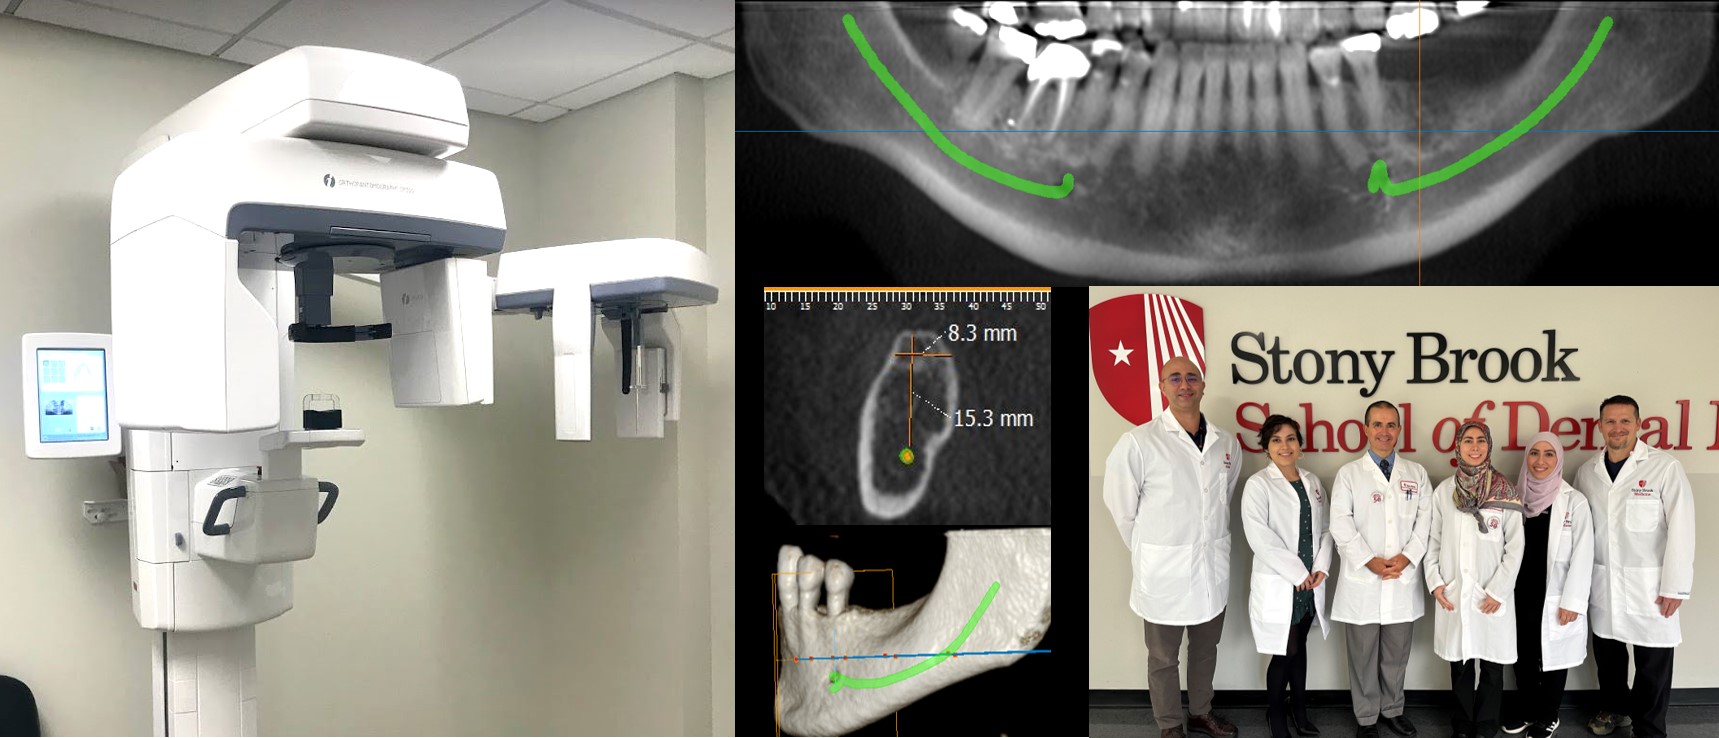 Imagery from the Oral and Maxillofacial Radiology Program